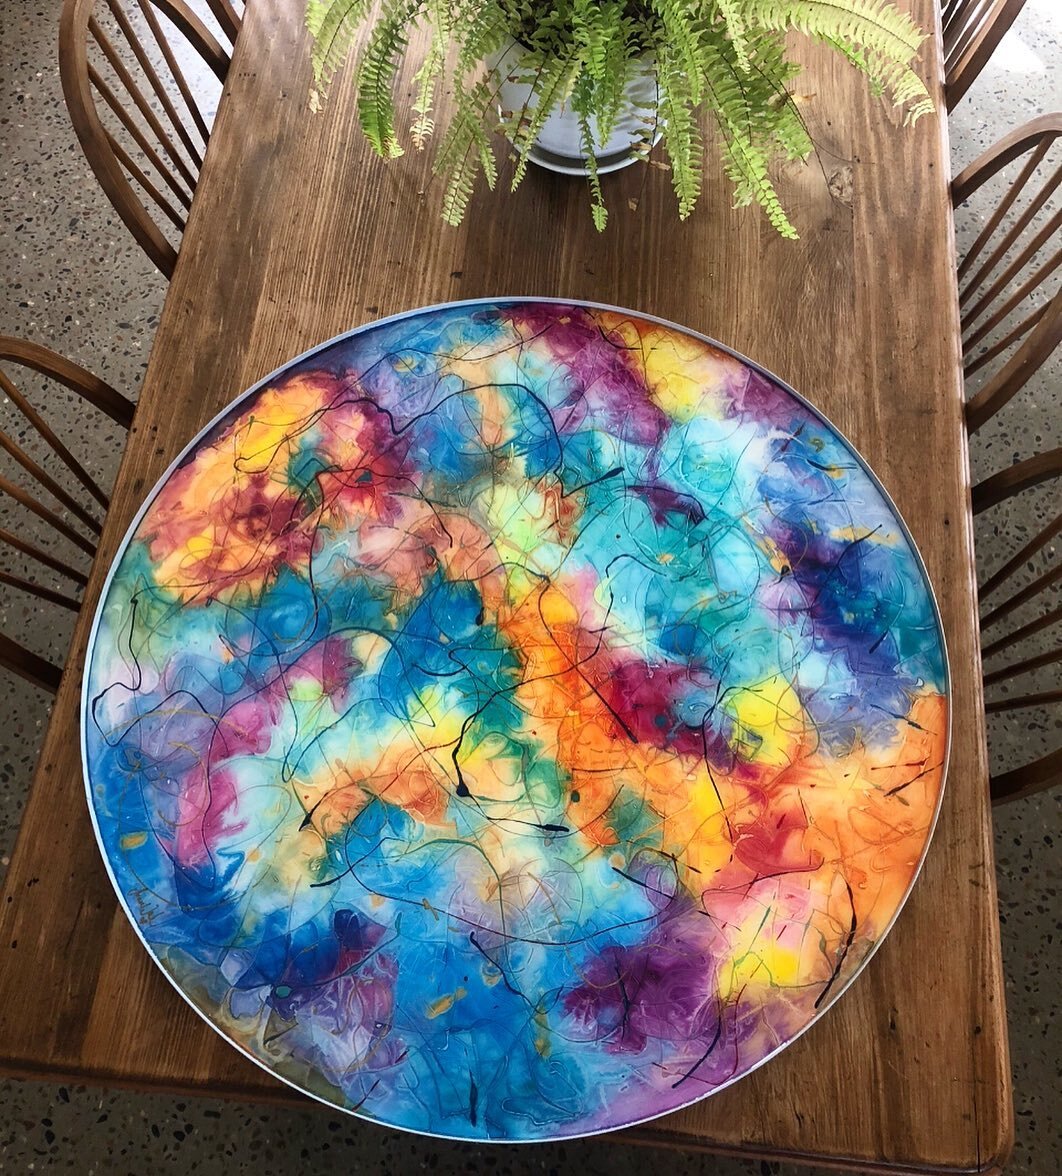 &ldquo;SOULFLAKES&rdquo;

Resin Portal  commission!! 
90cm 

Get your very own SoulFlake @ 
www.SoulFlakes.com.au 

Link in bio 😊🎨🖌

#soulflakes #healing #wholeness #love #colour #soulflakesforyou #healingart #intuitiveart #soulflakestudio #mornin